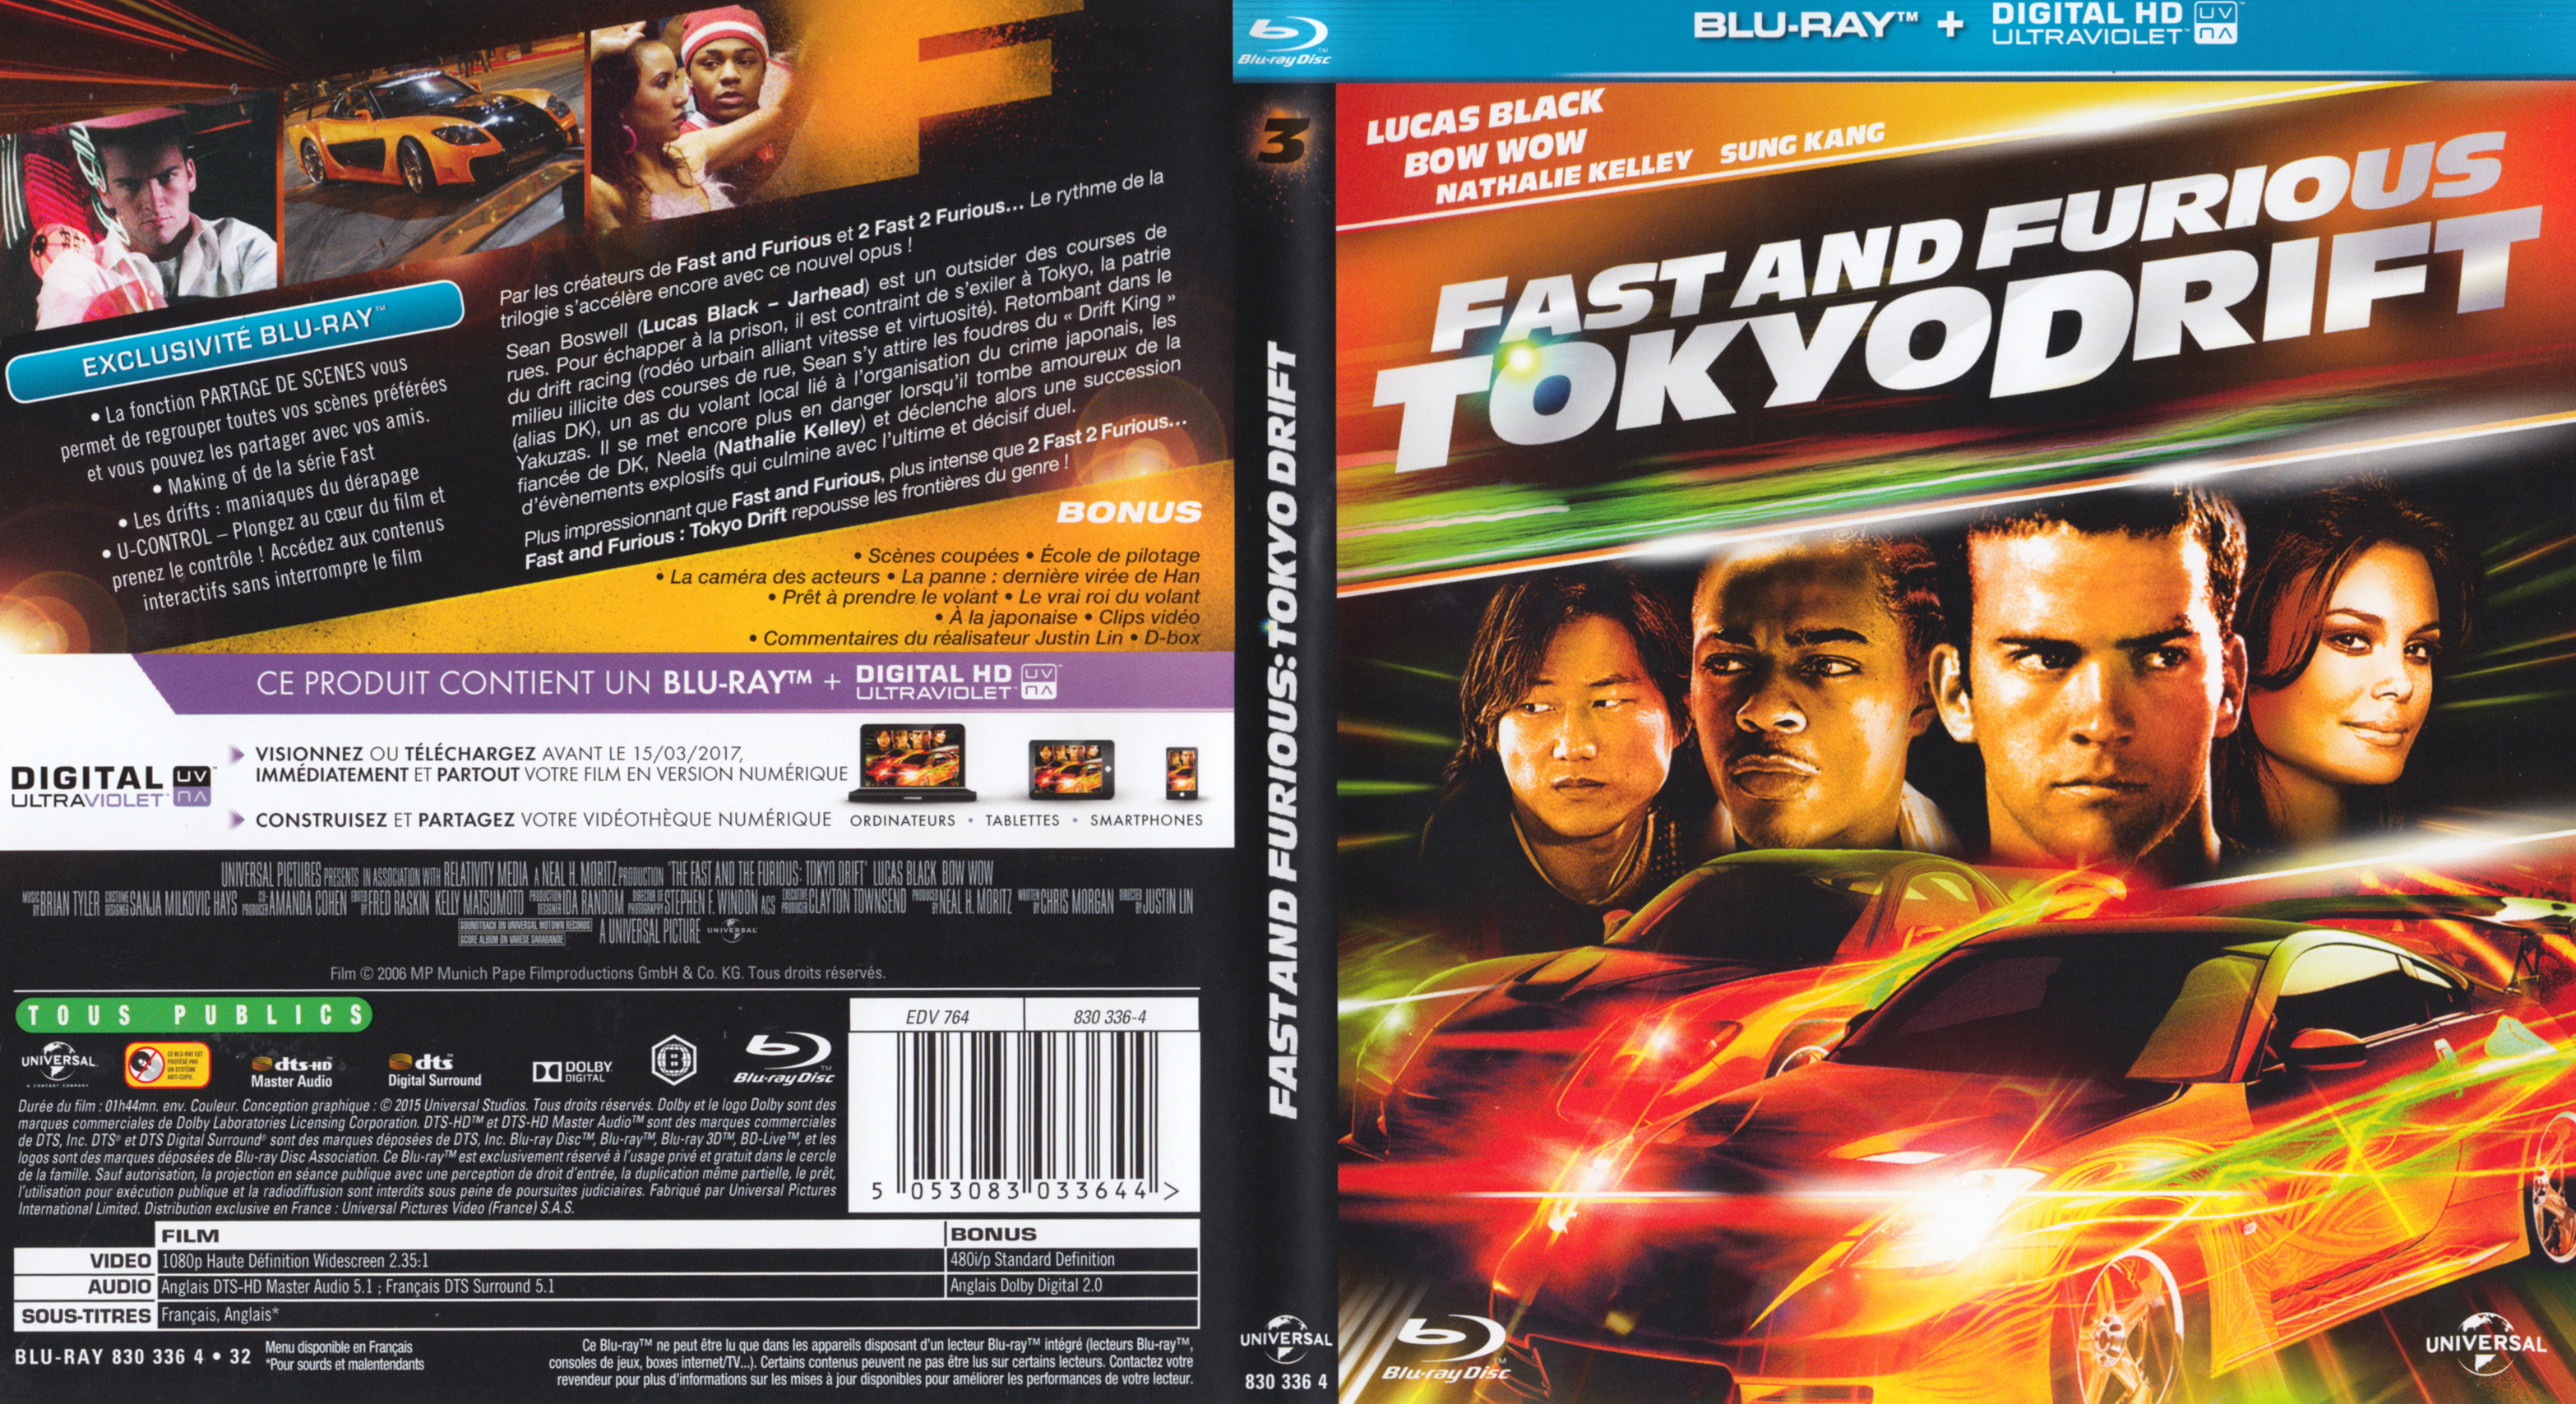 Jaquette DVD Fast and Furious Tokyo Drift (BLU-RAY) v4